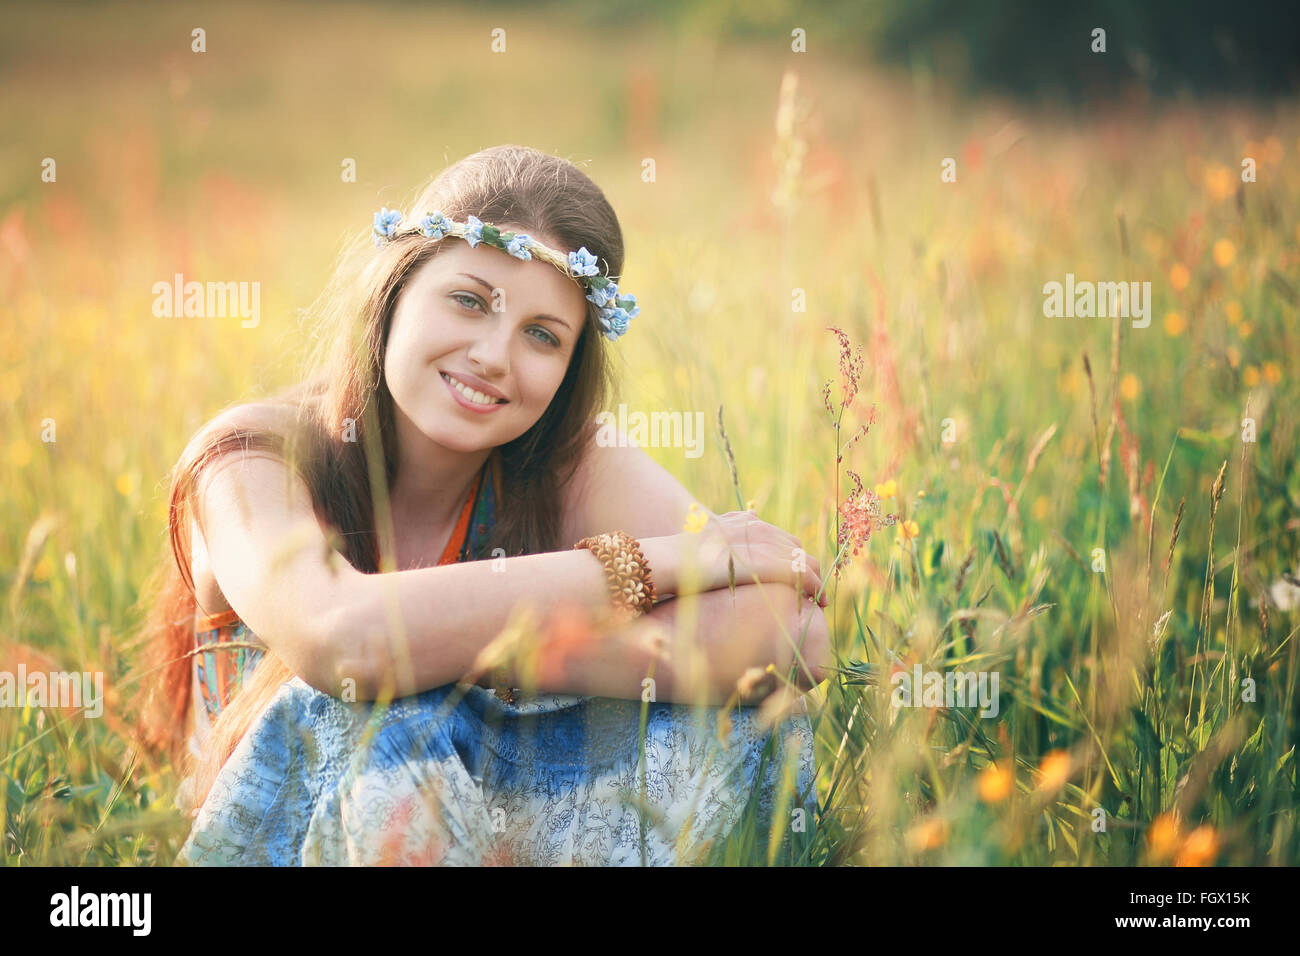 Smiling romantic woman in flower field . Hippie and gypsy dress Stock Photo